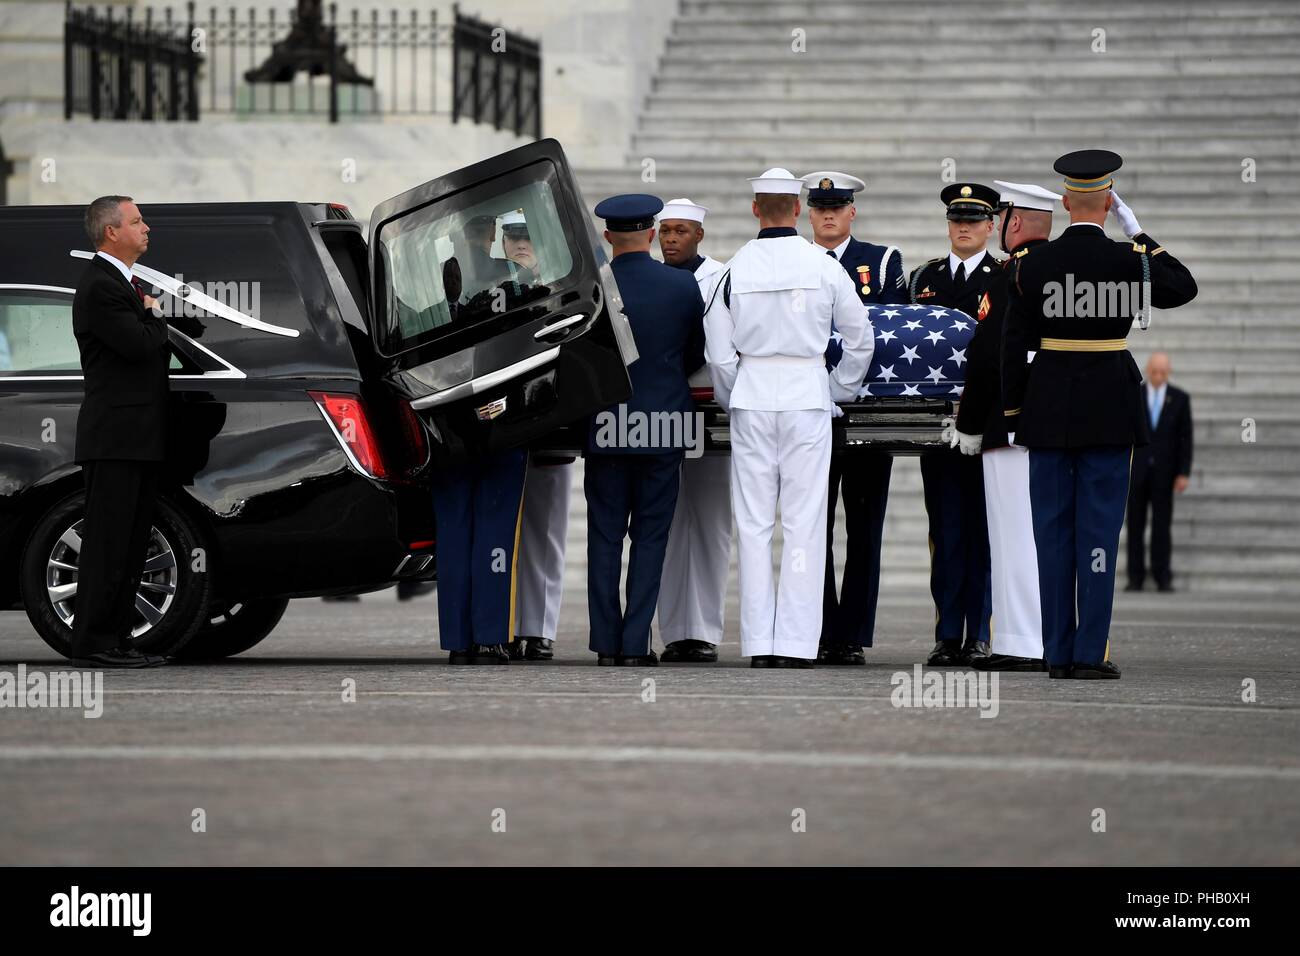 Washington, USA. 31st Aug, 2018. Soldiers carry the casket of former U.S. Senator John McCain out of the hearse at the east side of the U.S. Capitol in Washington, DC, the United States, on Aug. 31, 2018. John McCain, a two-time contender for the U.S. presidency, died at his home in the state of Arizona on Aug. 25. Credit: Yang Chenglin/Xinhua/Alamy Live News Stock Photo